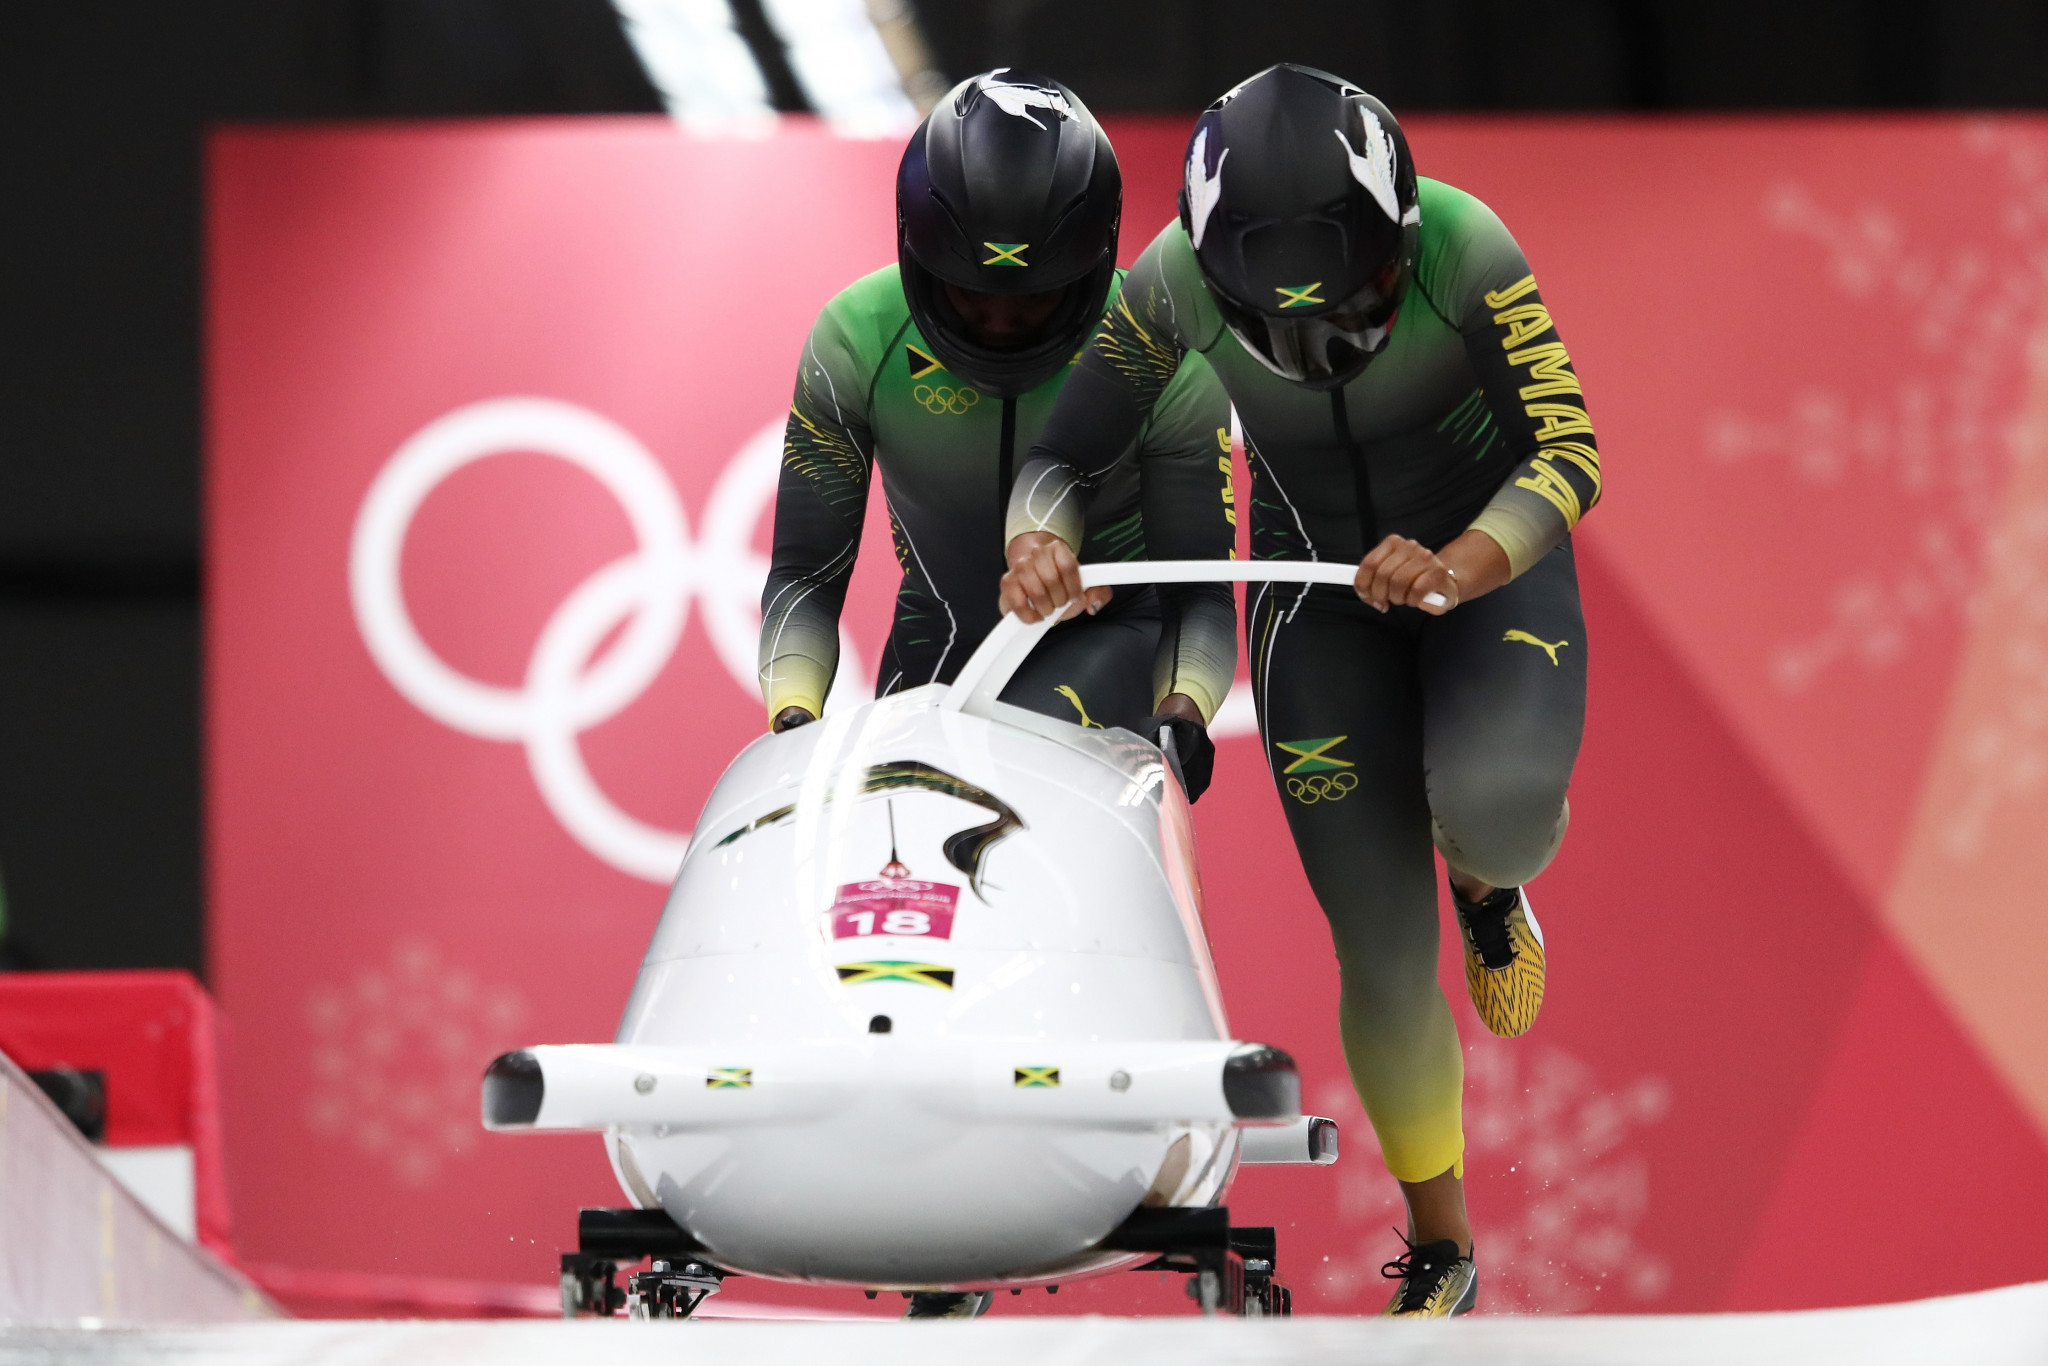 Jamaica were represented in the two-woman event for the first time at Pyeongchang 2018 ©Getty Images